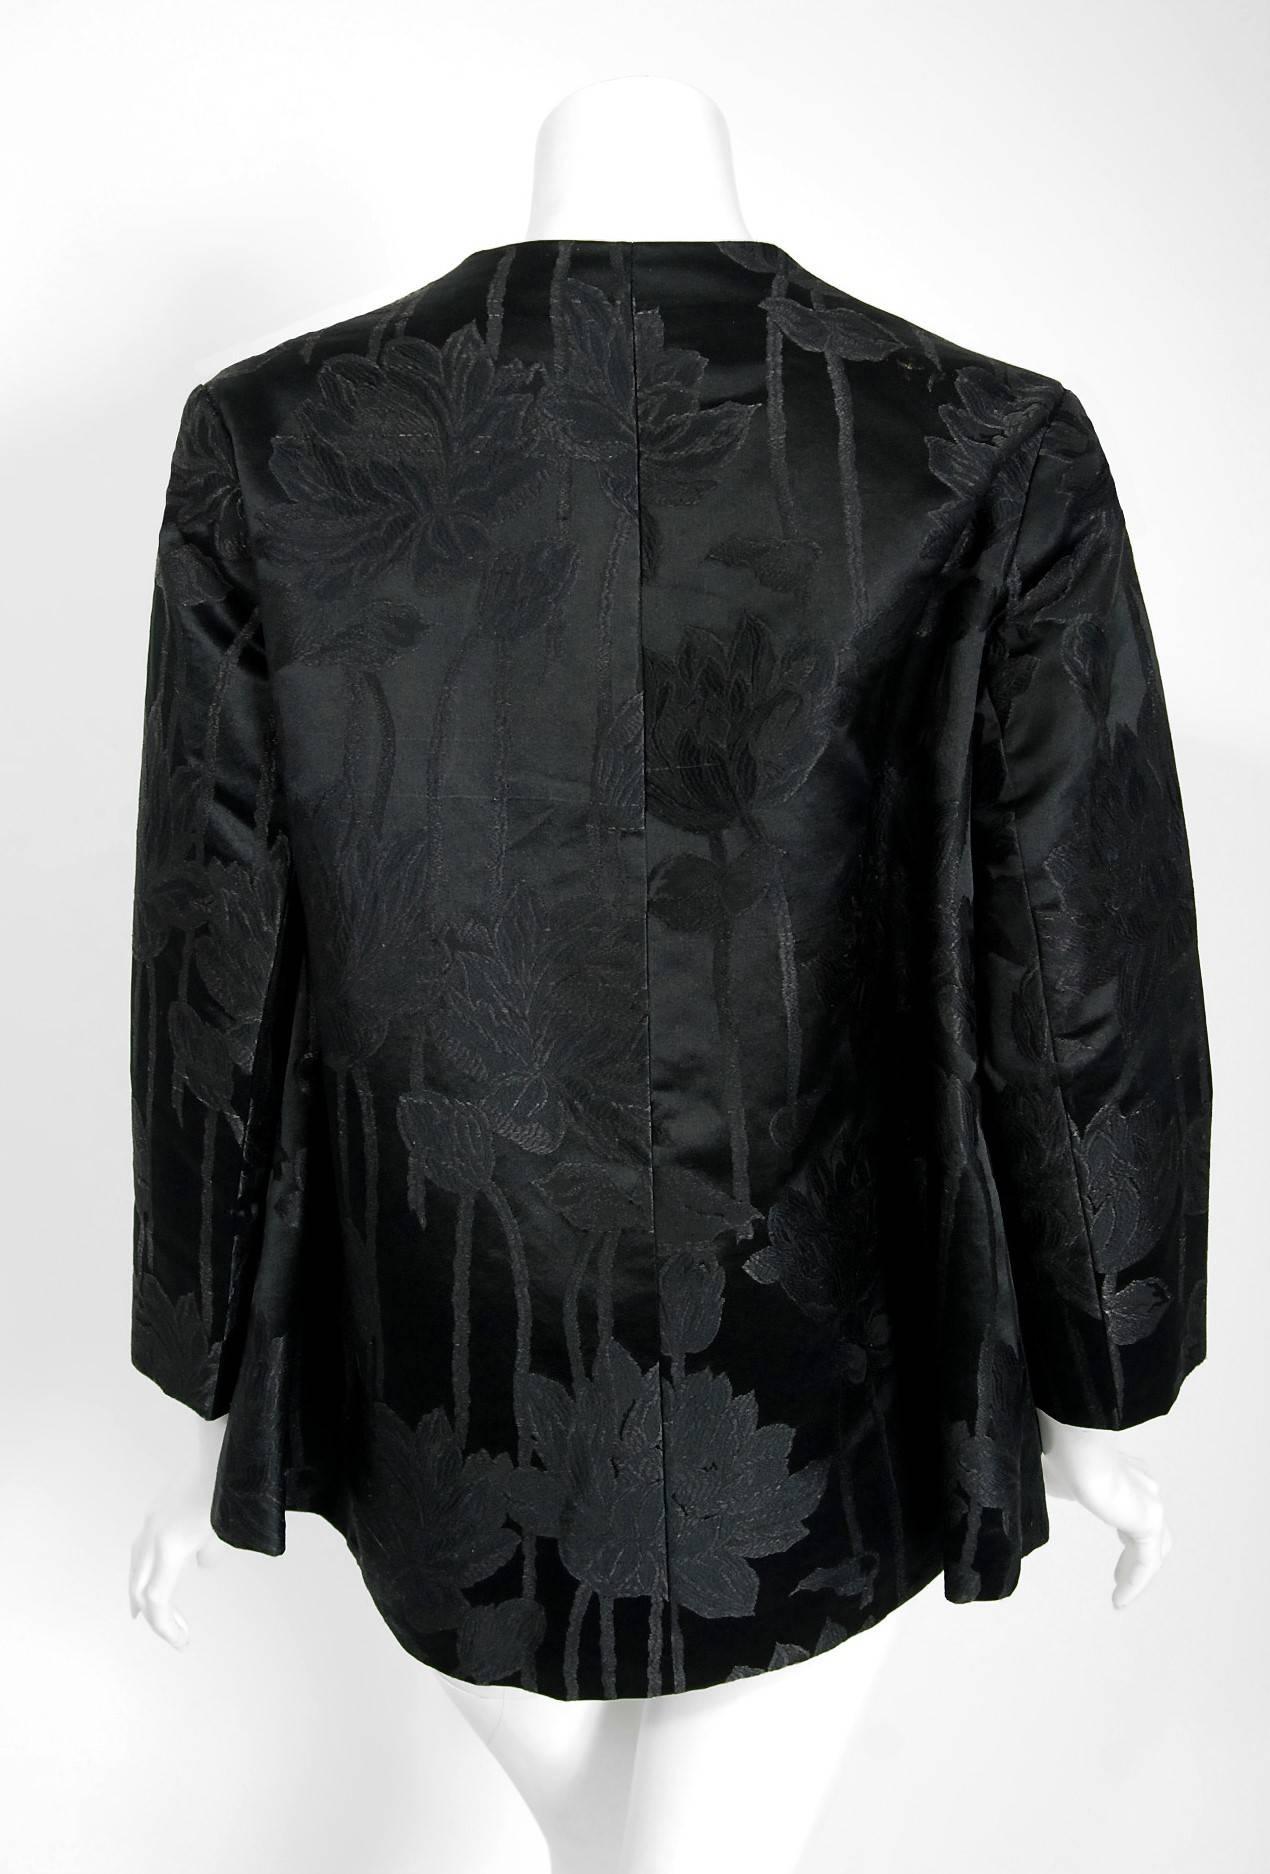 Women's Vintage 1953 Christian Dior Haute-Couture Floral Silk Brocade Winged Jacket